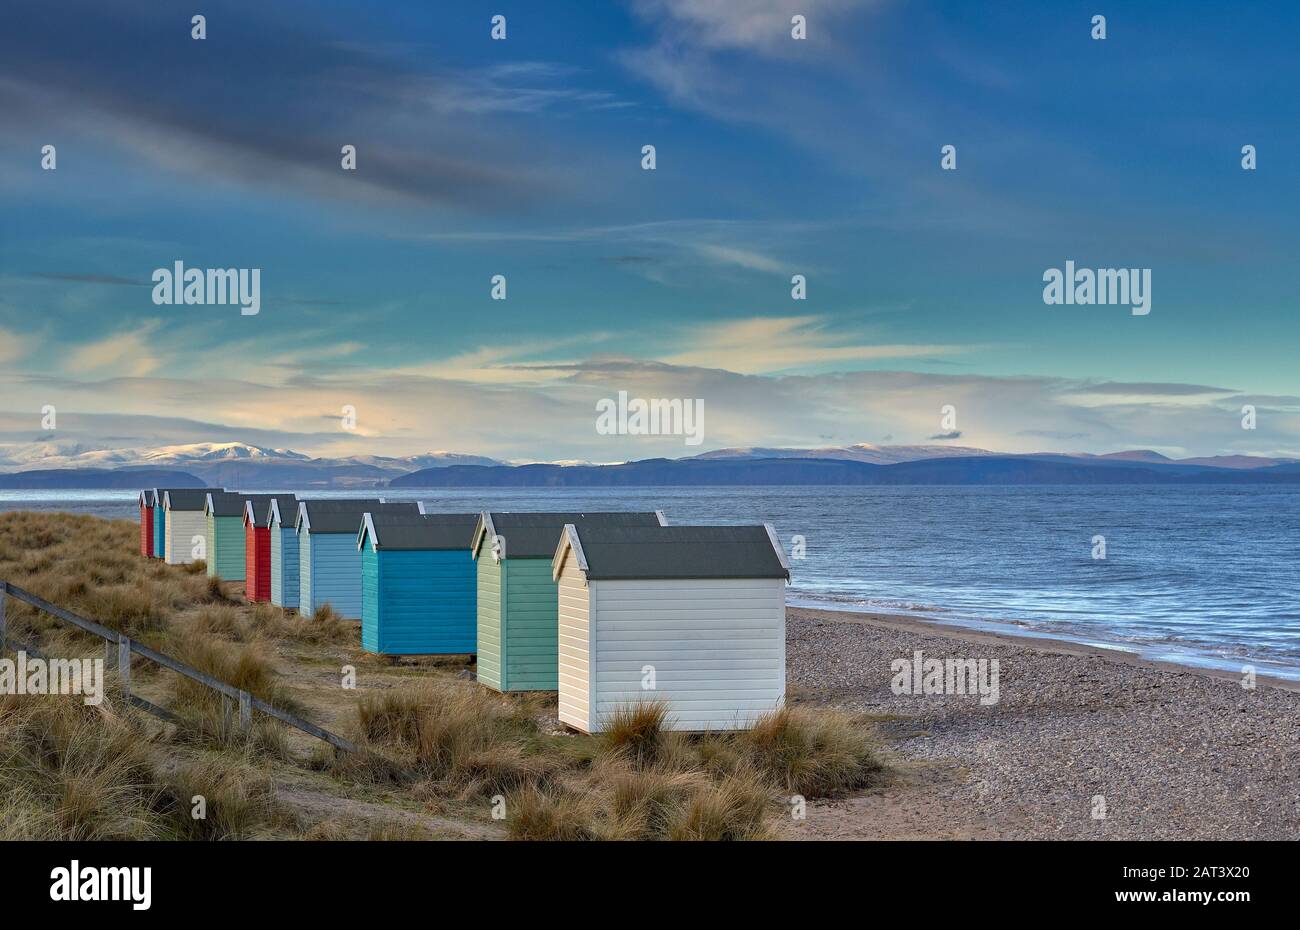 FINDHORN BEACH MORAY SCOTLAND A ROW OF COLOURED BEACH HUTS OR CHALETS A BLUE SKY AND SEA THE BLACK ISLE IN THE DISTANCE Stock Photo